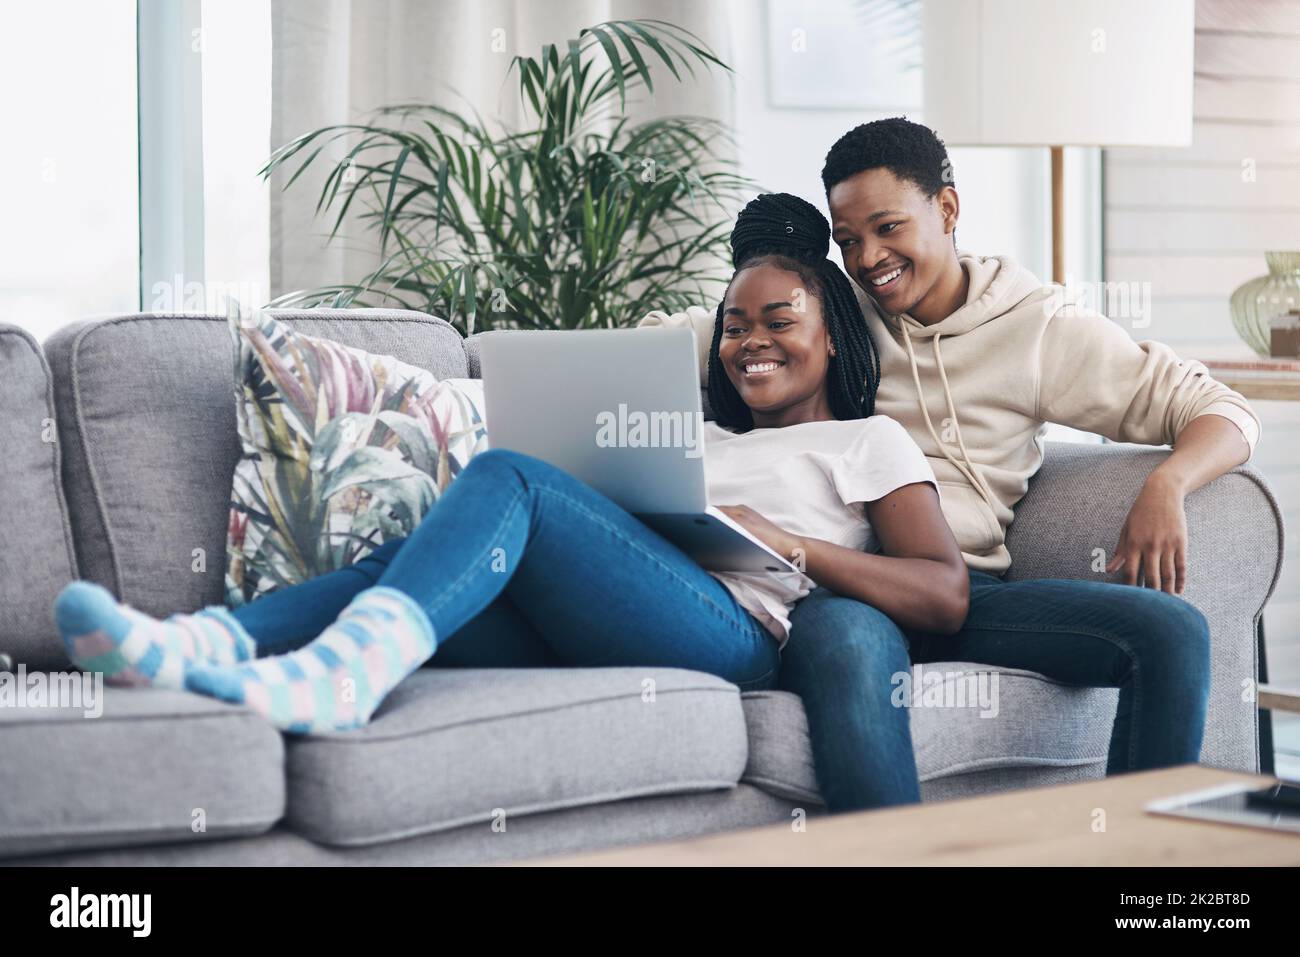 Nothing says romance like a cosy weekend at home. Shot of a young couple using a laptop while relaxing on the sofa at home. Stock Photo